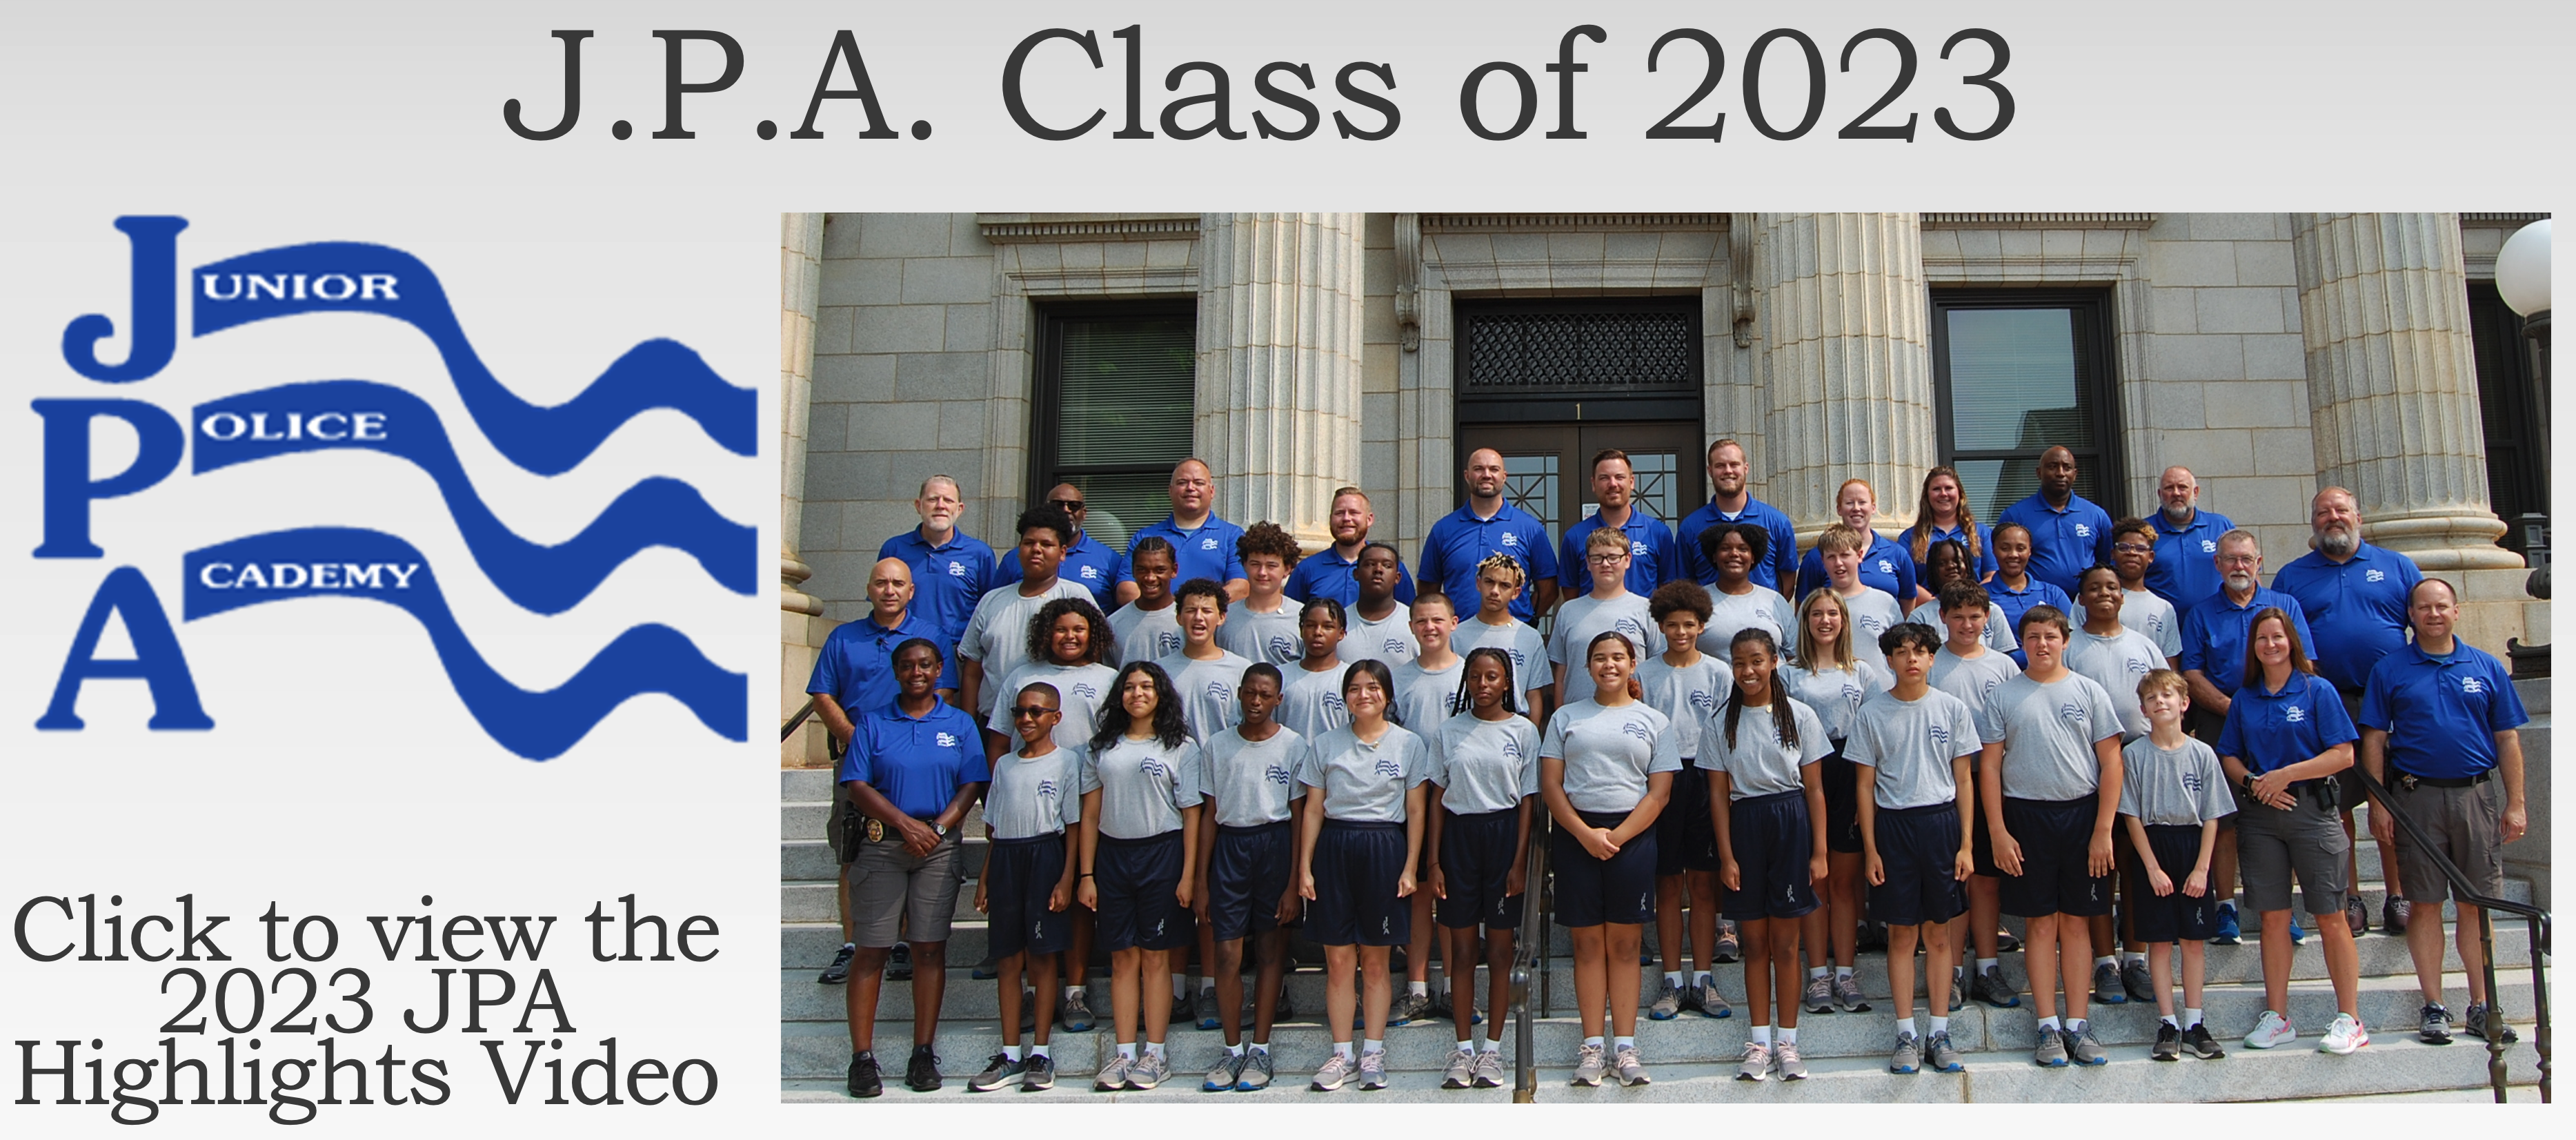 Picture of the Junior Police Academy Class of 2023